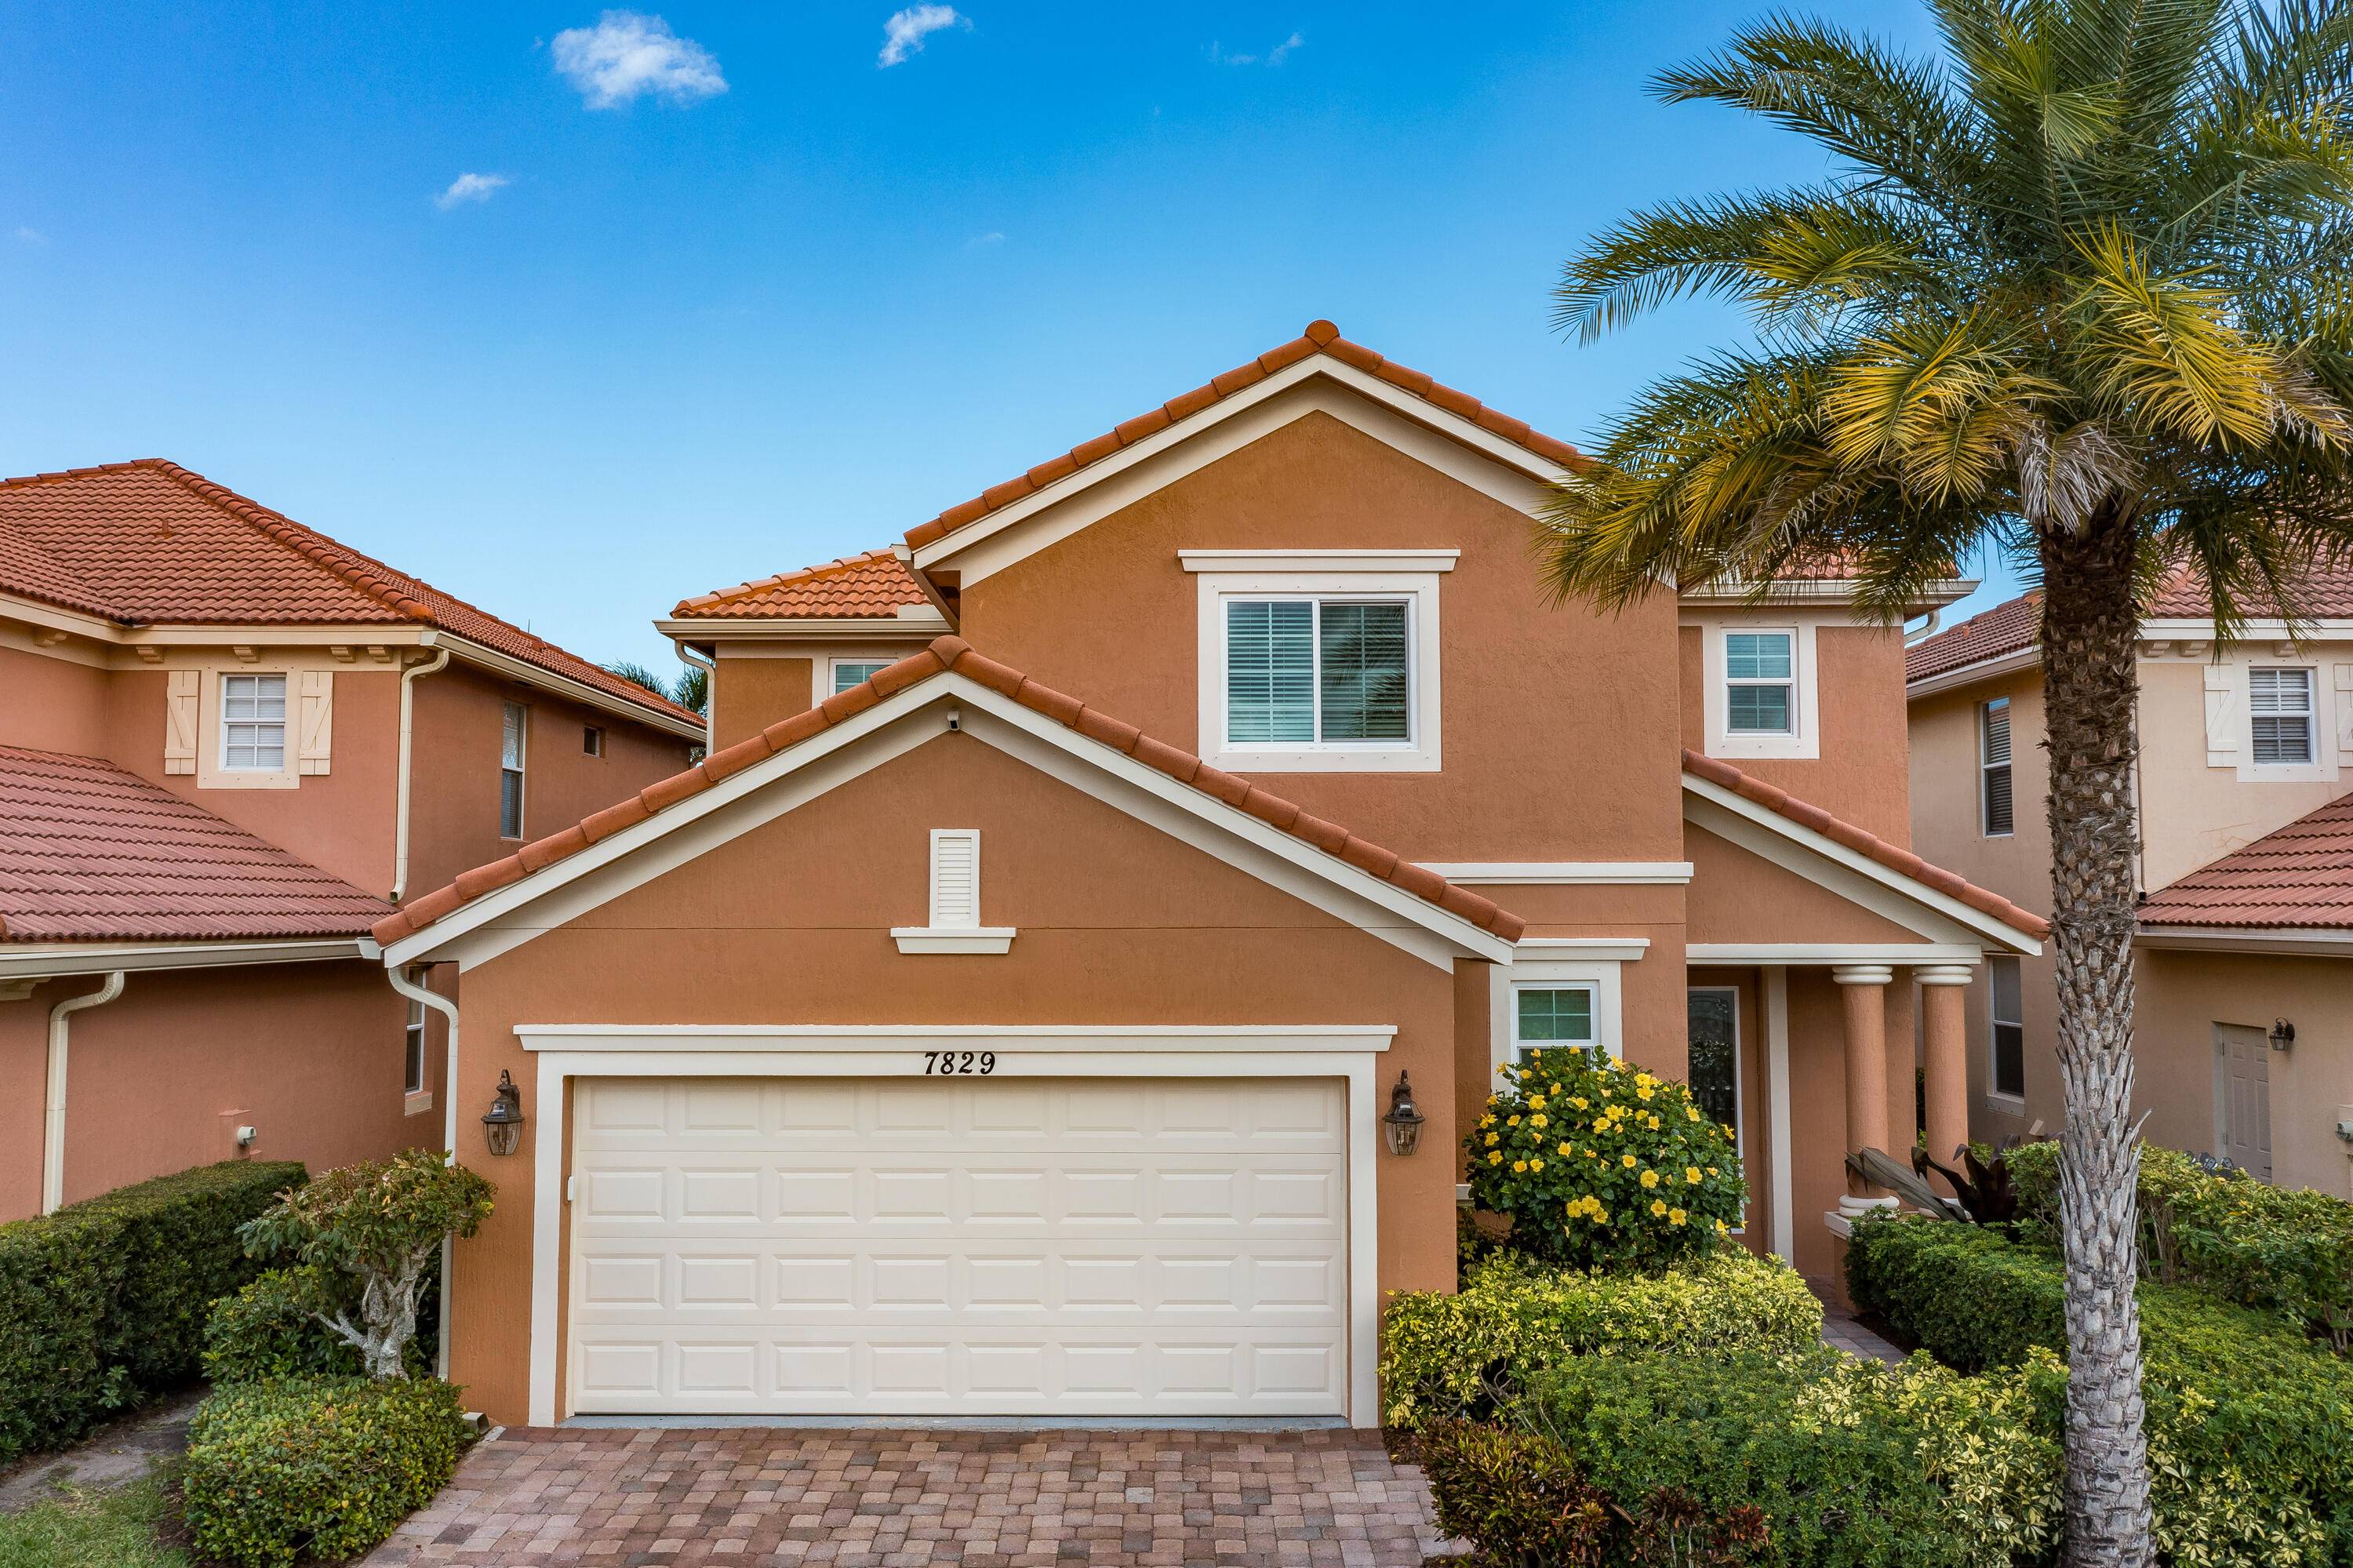 Stunning lakefront property available in gated Oaks community in Hobe Sound.